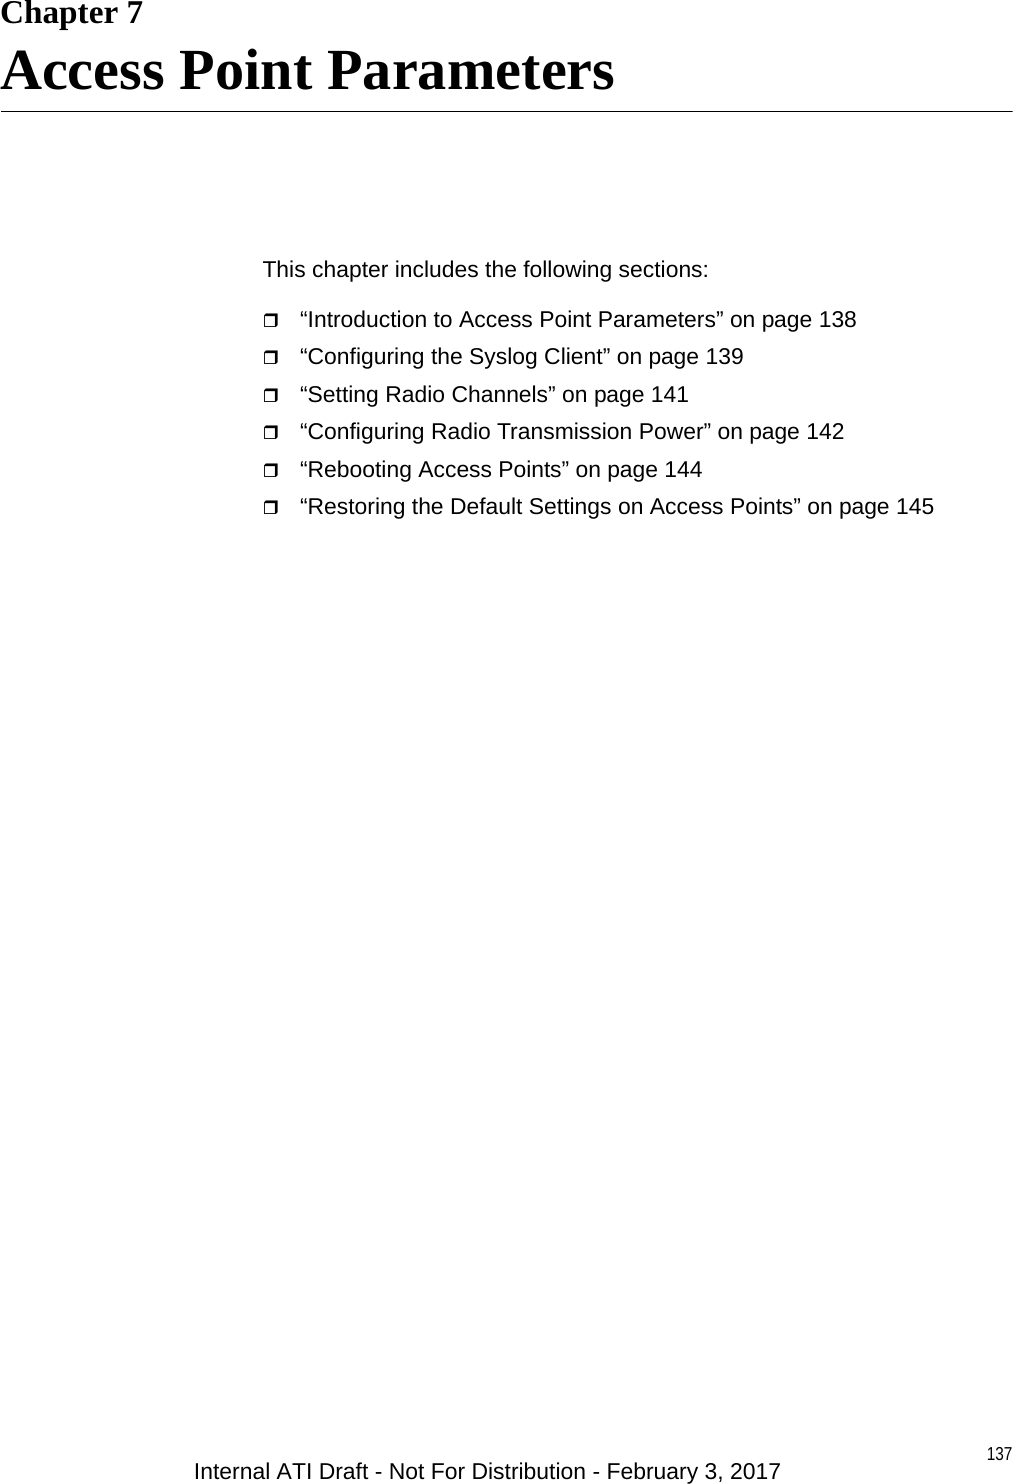 137Chapter 7Access Point ParametersThis chapter includes the following sections:“Introduction to Access Point Parameters” on page 138“Configuring the Syslog Client” on page 139“Setting Radio Channels” on page 141“Configuring Radio Transmission Power” on page 142“Rebooting Access Points” on page 144“Restoring the Default Settings on Access Points” on page 145Internal ATI Draft - Not For Distribution - February 3, 2017